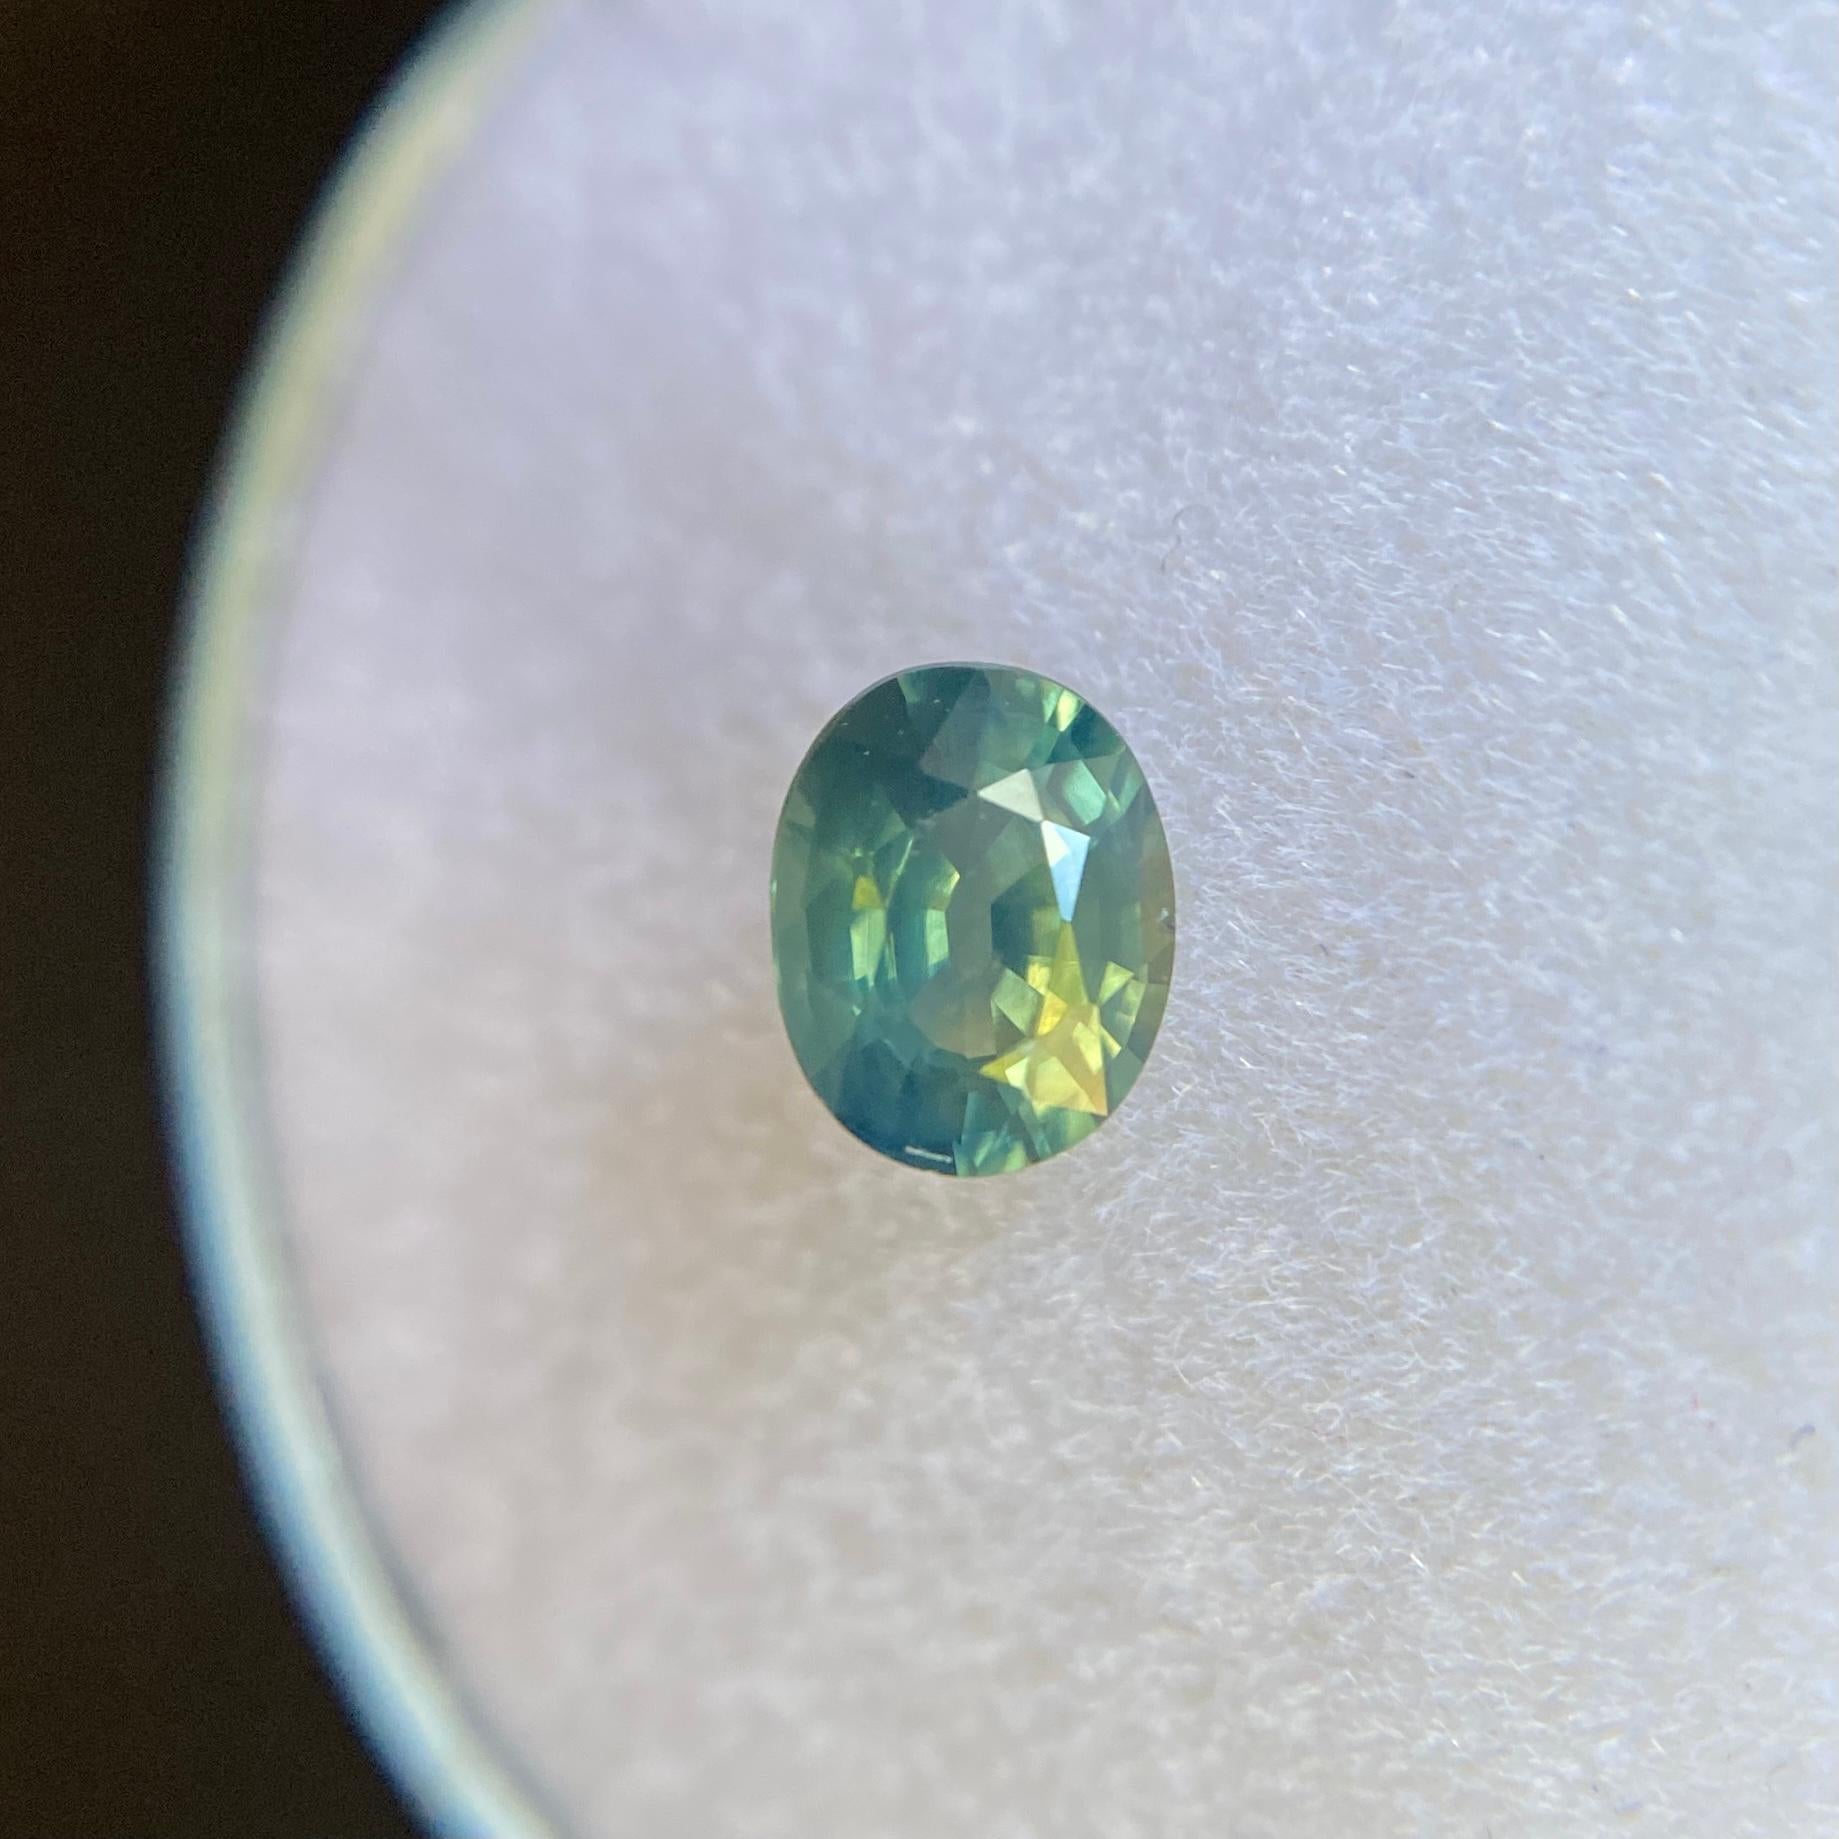 Natural Greenish Yellow Blue Parti-Colour Australian Sapphire Gemstone.

0.61 Carat with a beautiful and unique greenish yellow blue colour and excellent clarity, a very clean stone with only some small natural inclusions visible when looking